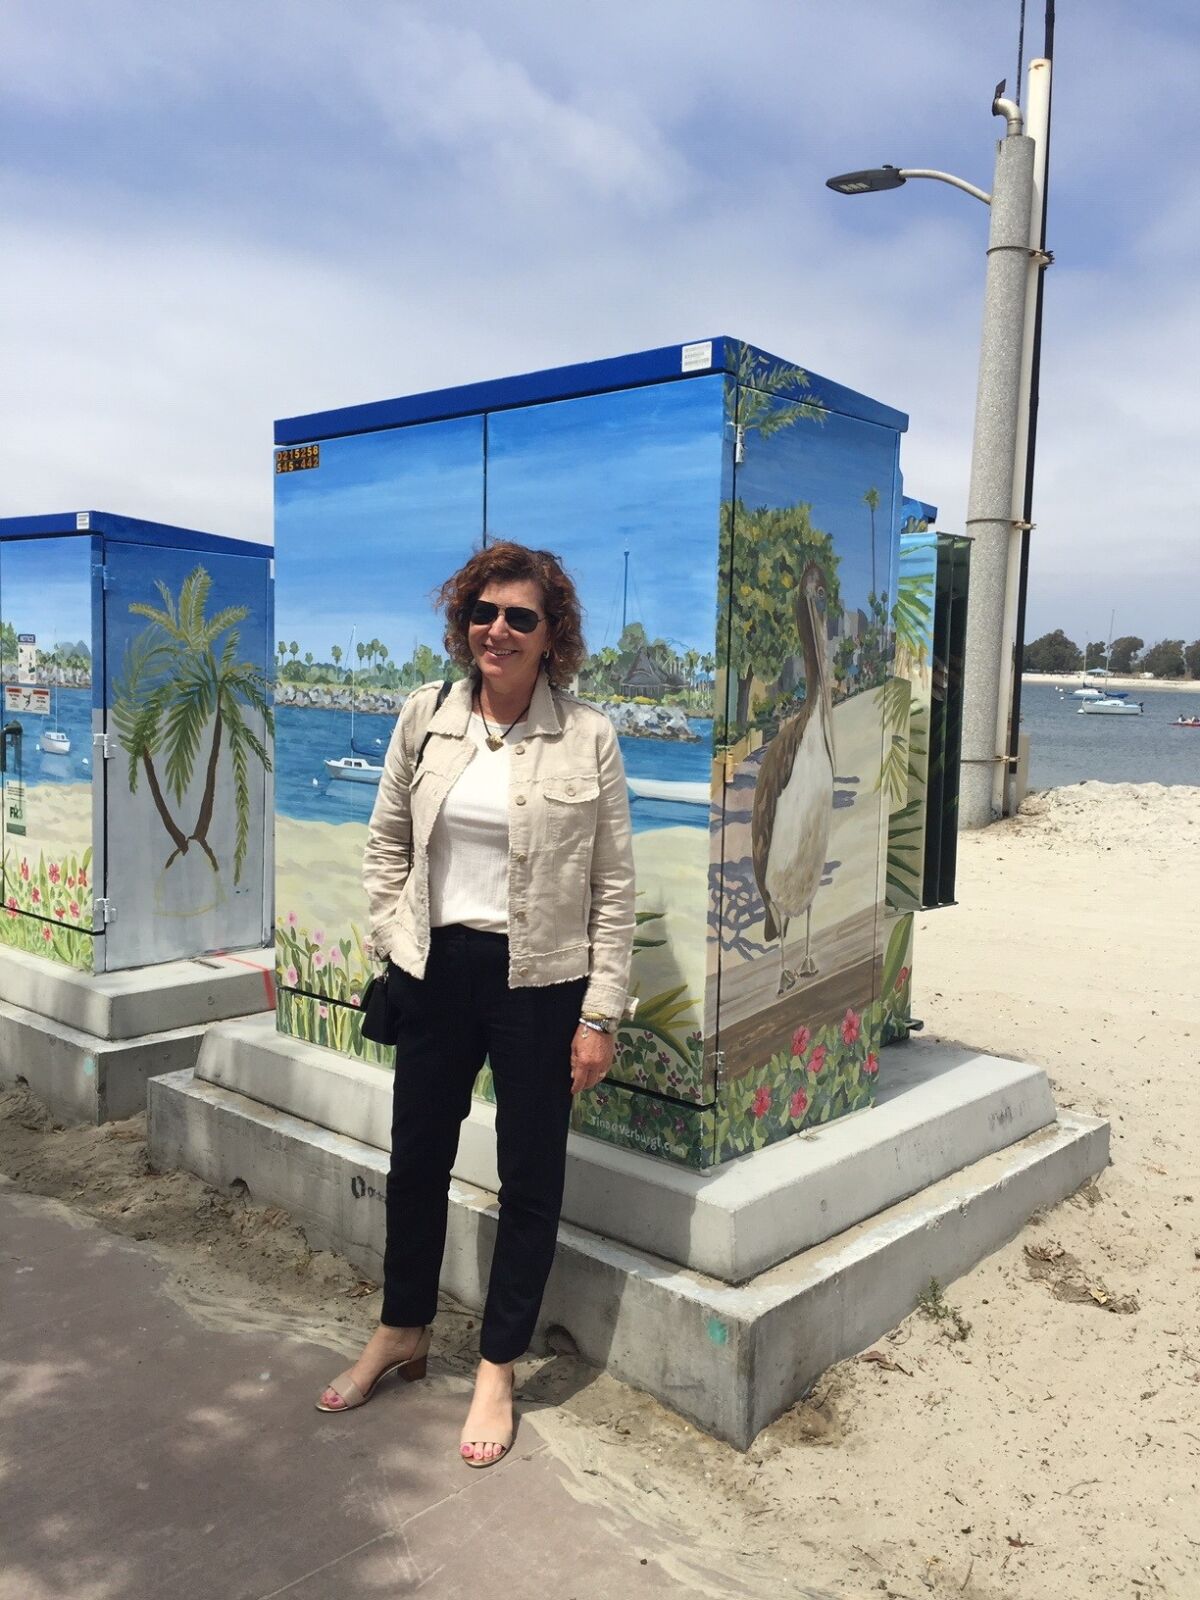 South Mission Beach resident Tina Verburgt paints beach scenes on utility boxes in the community.